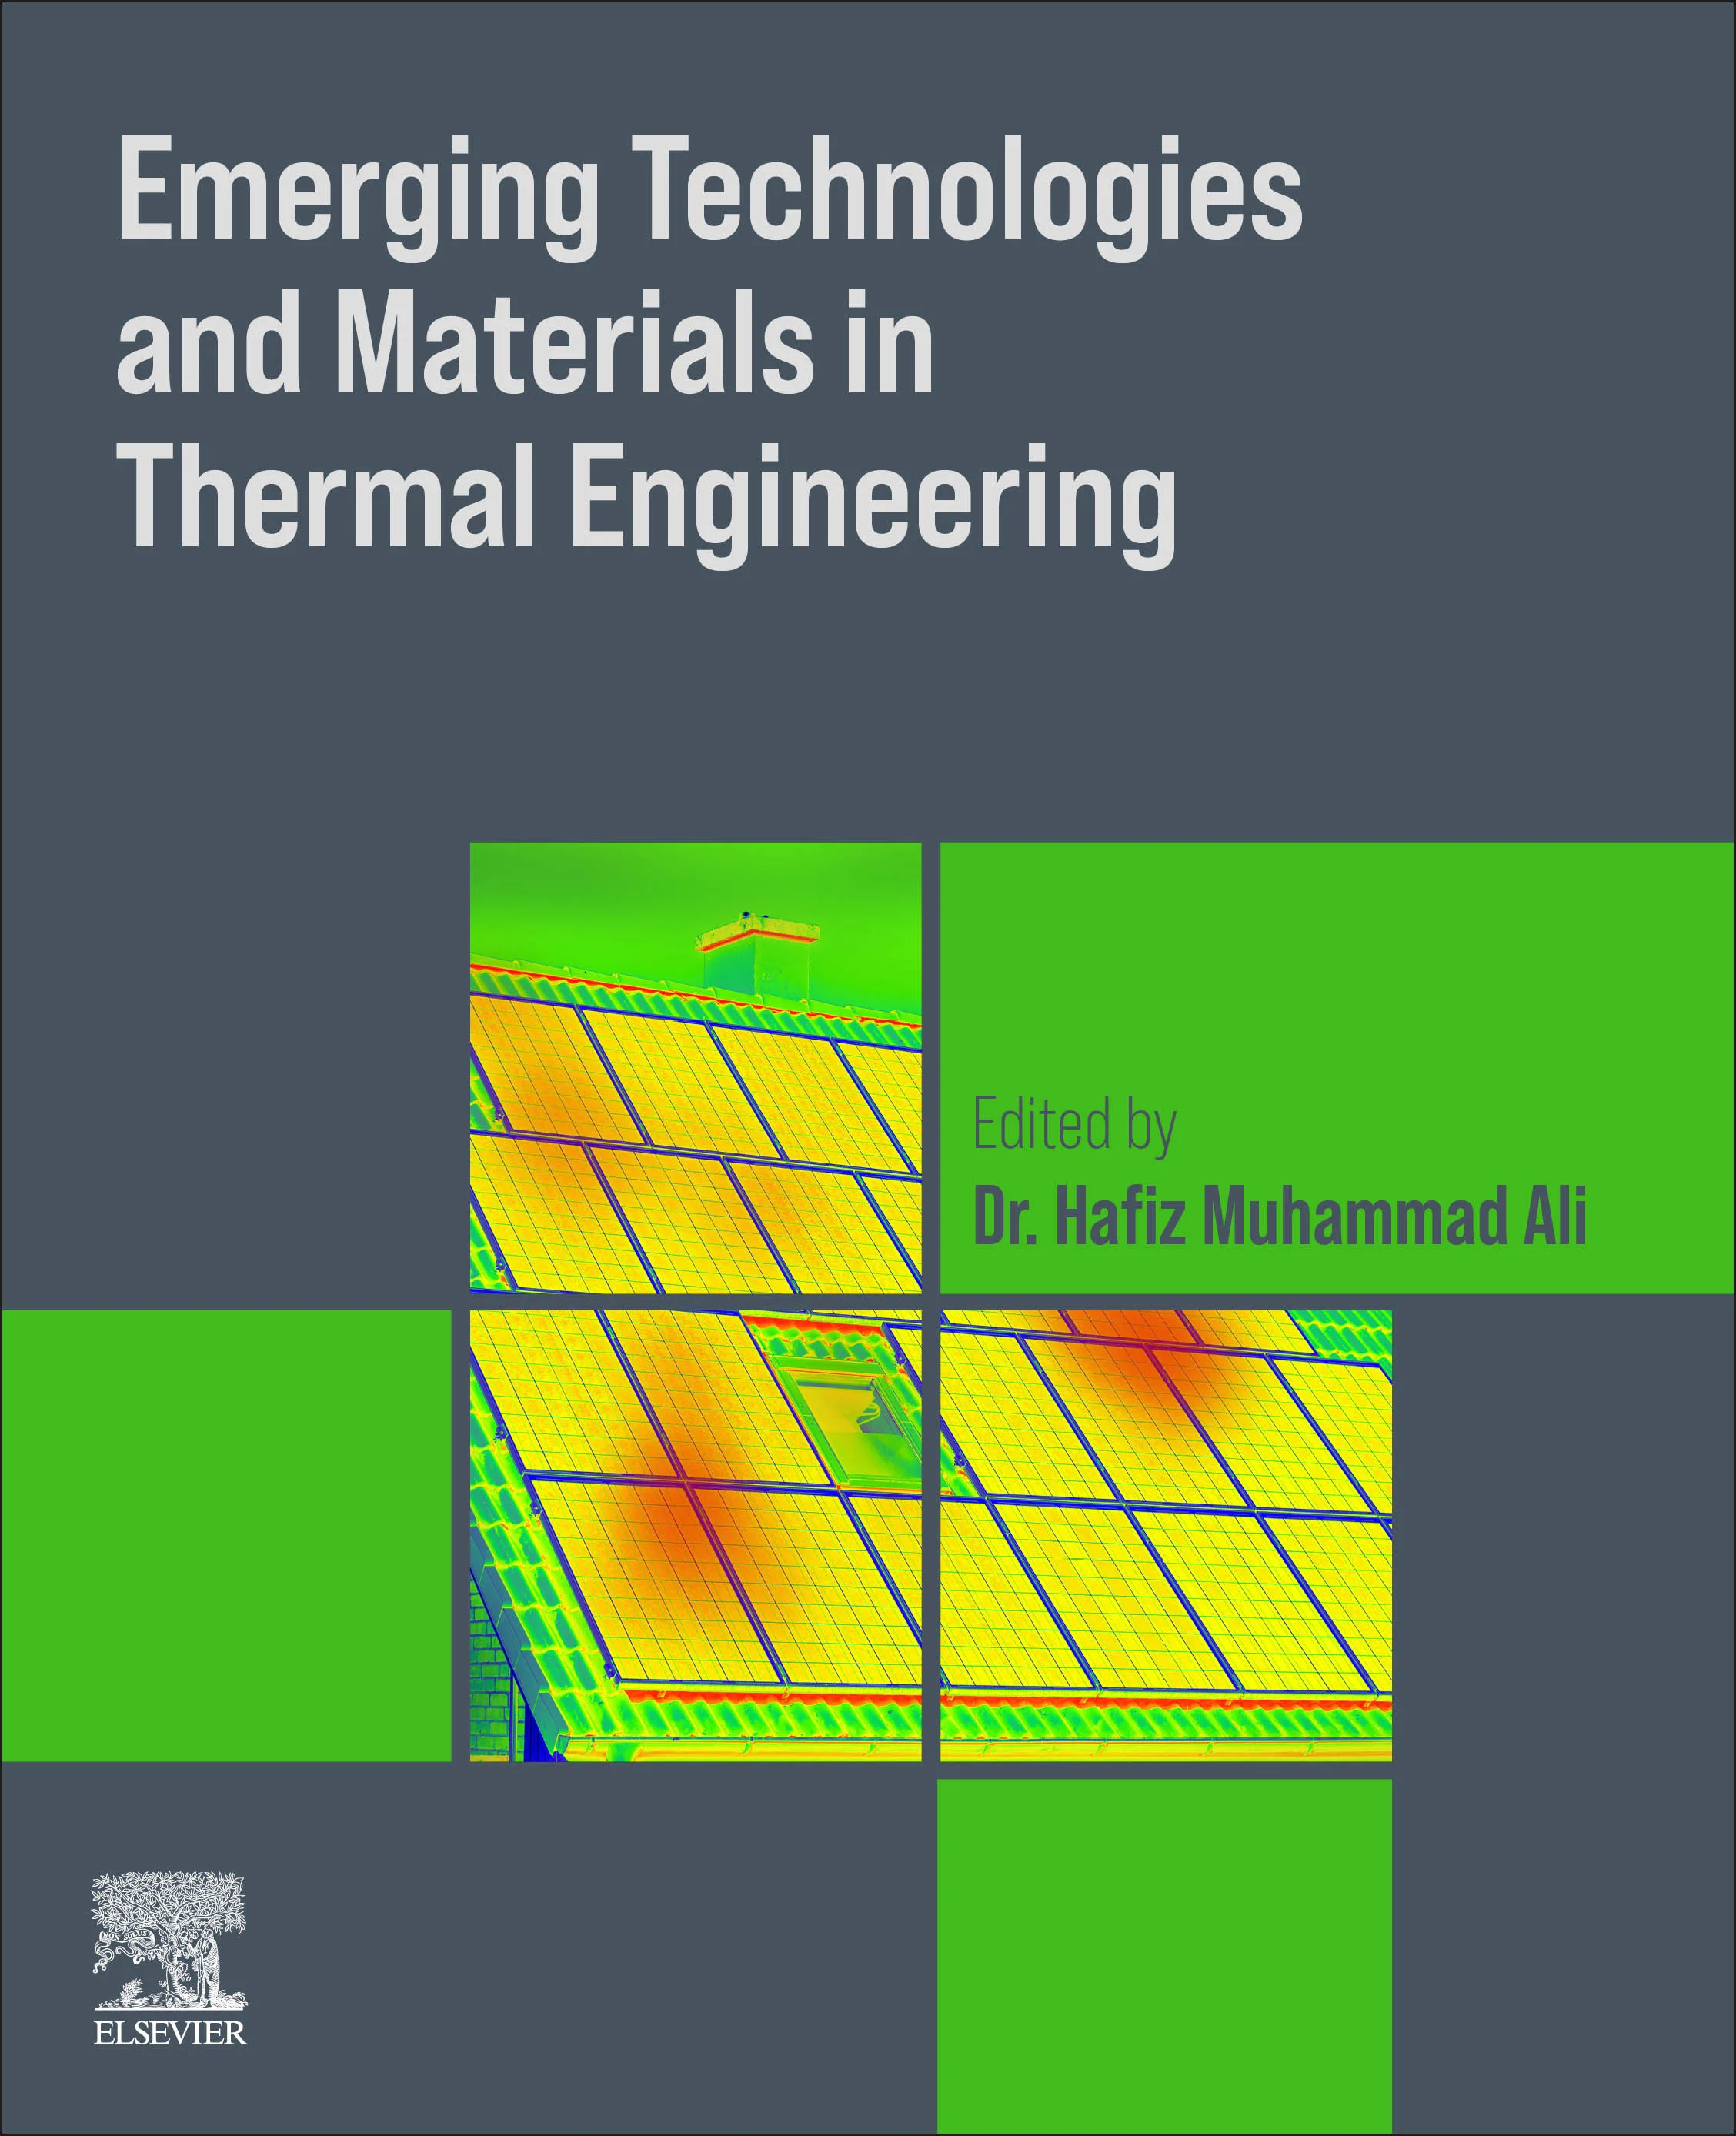 Sample cover of Emerging Technologies and Materials in Thermal Engineering